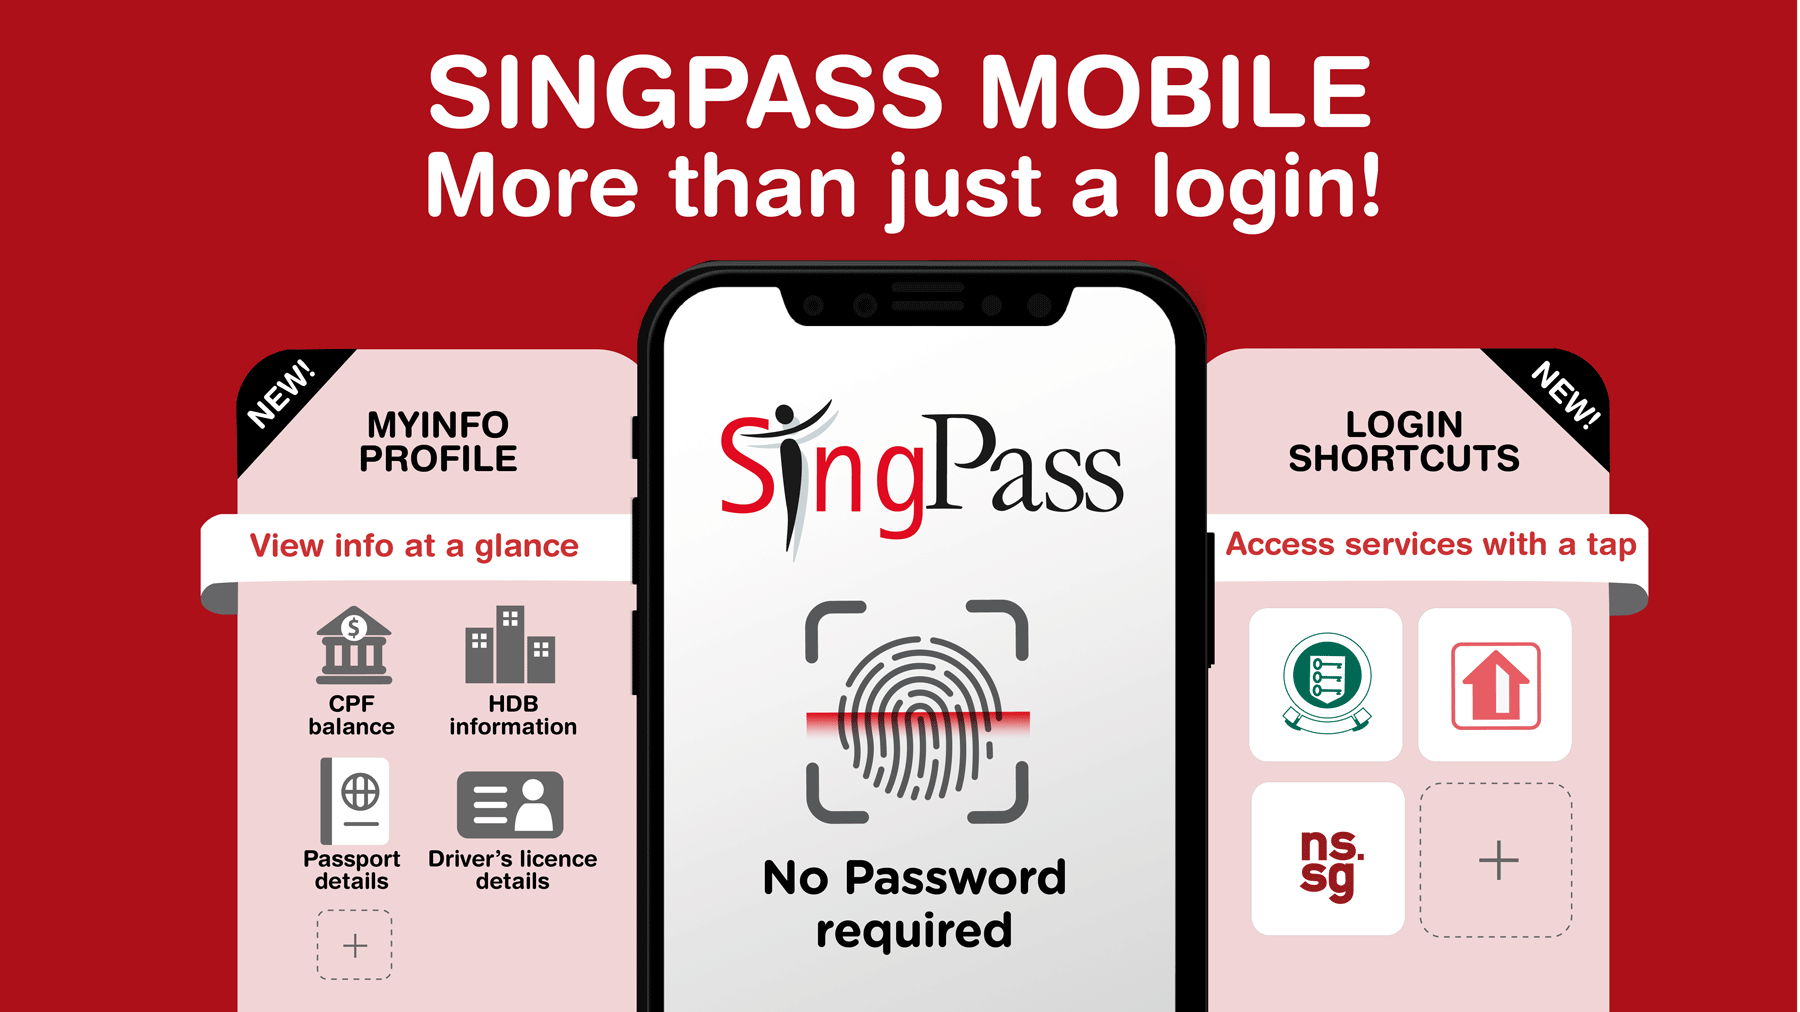 SingPass mobile and its improvements